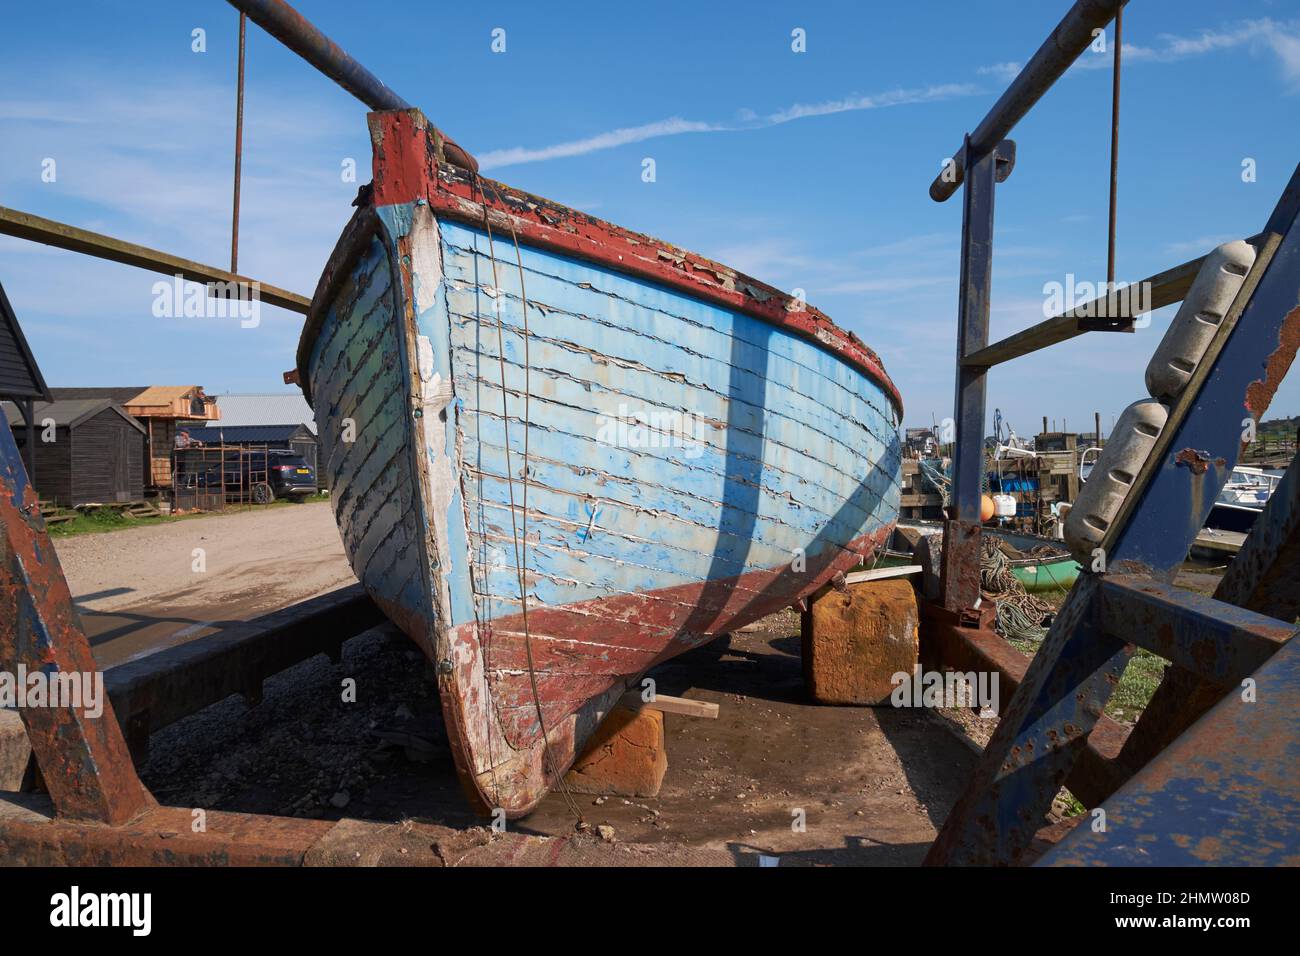 An old boat awaiting restoration at Southwold harbour, Suffolk, UK. Stock Photo